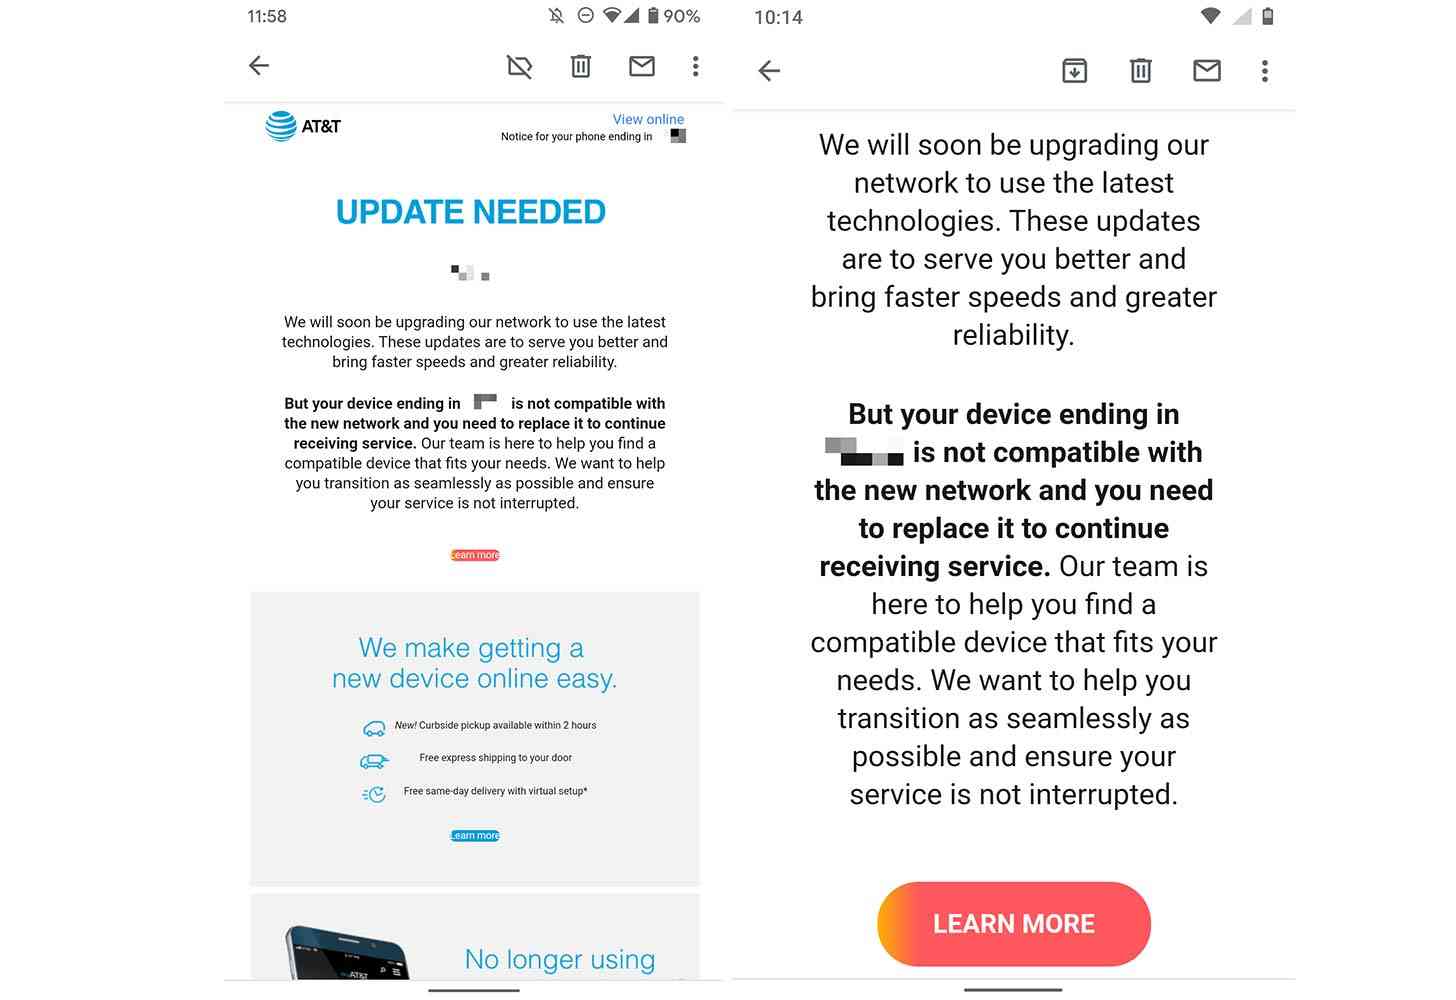 AT&T email upgrade phone before losing service